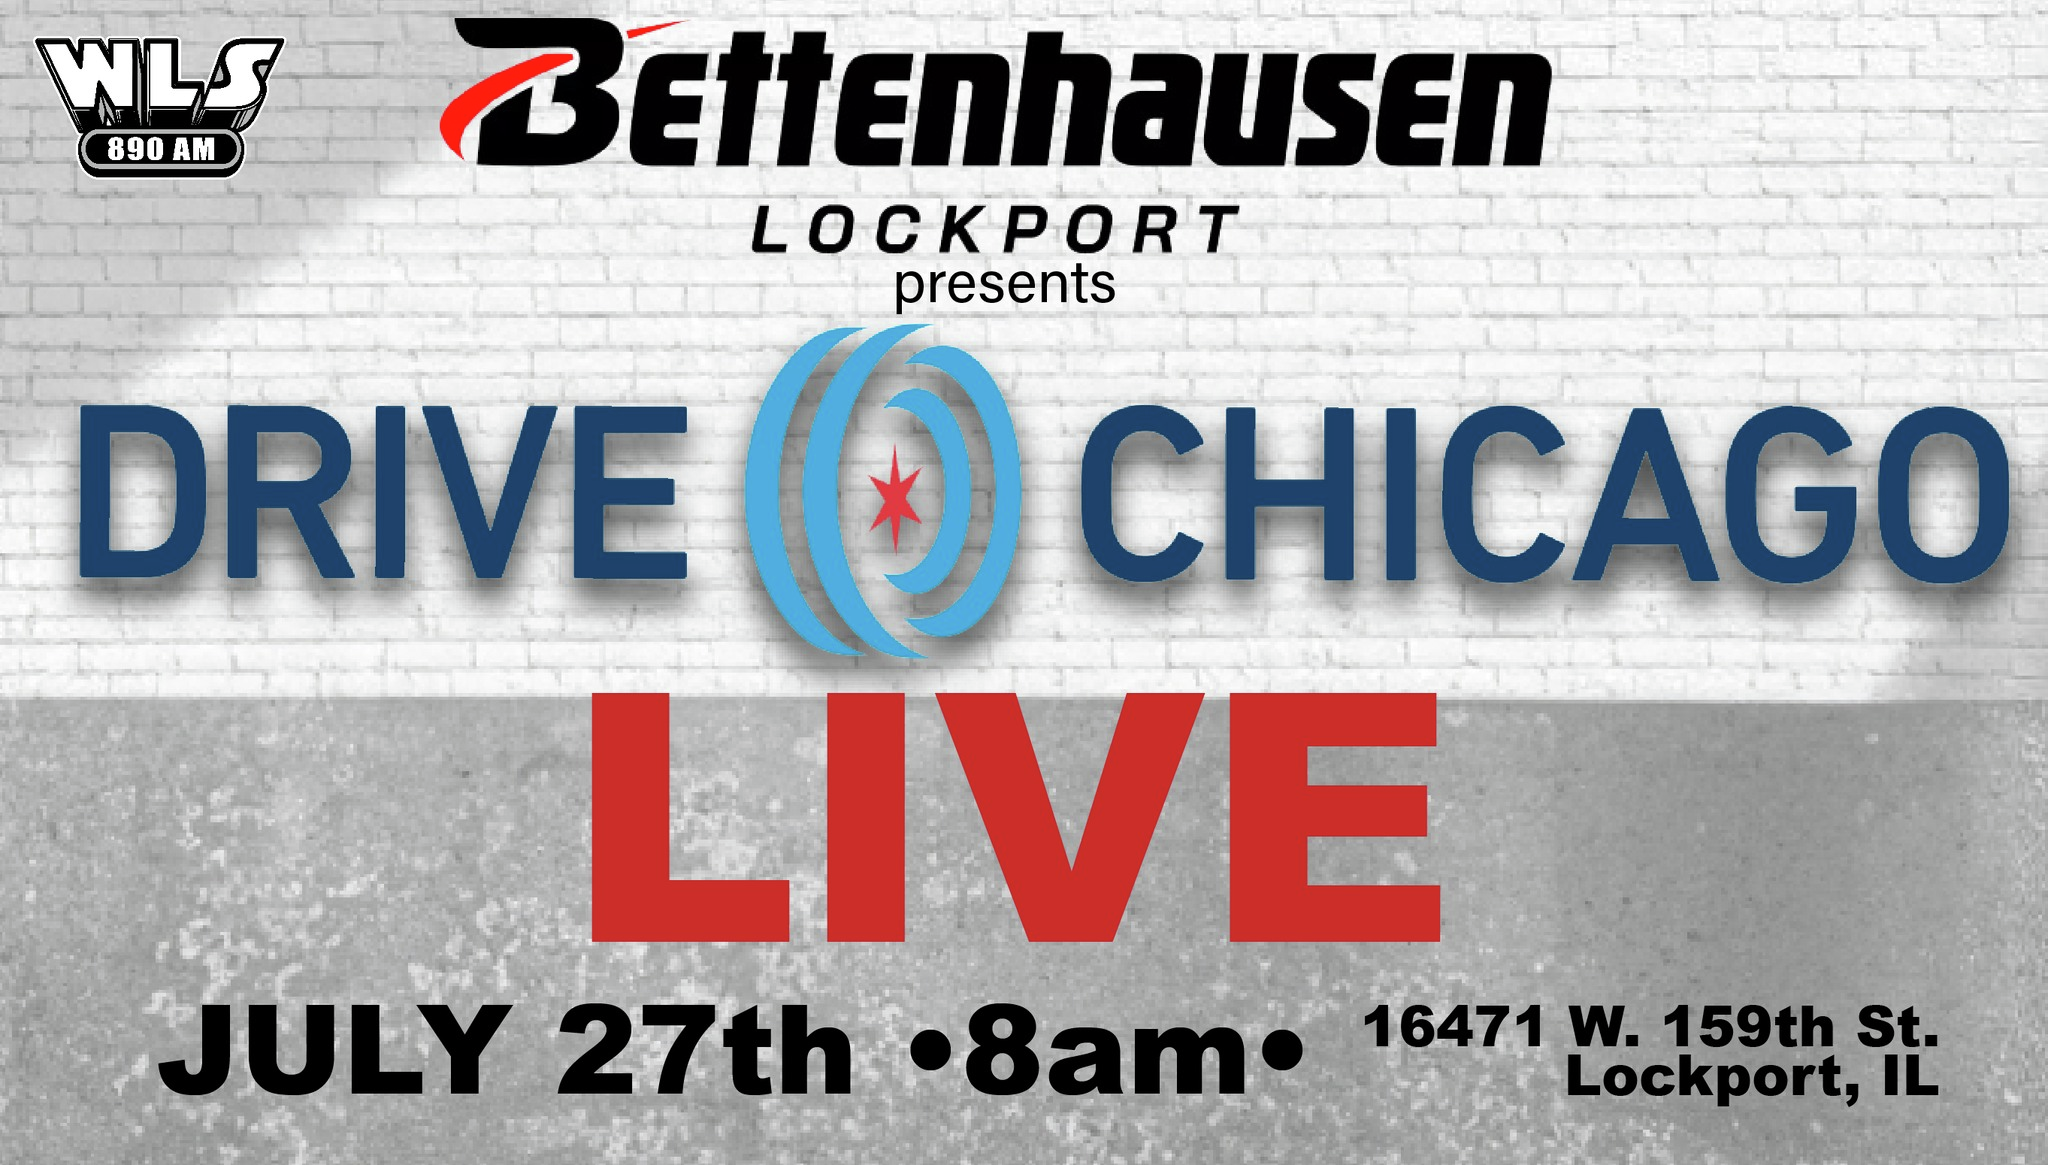 Cruise On By: Join the Drive Chicago Crew at the New Lockport Bettenhausen Dealership on July 26th from 8 - 9 AM